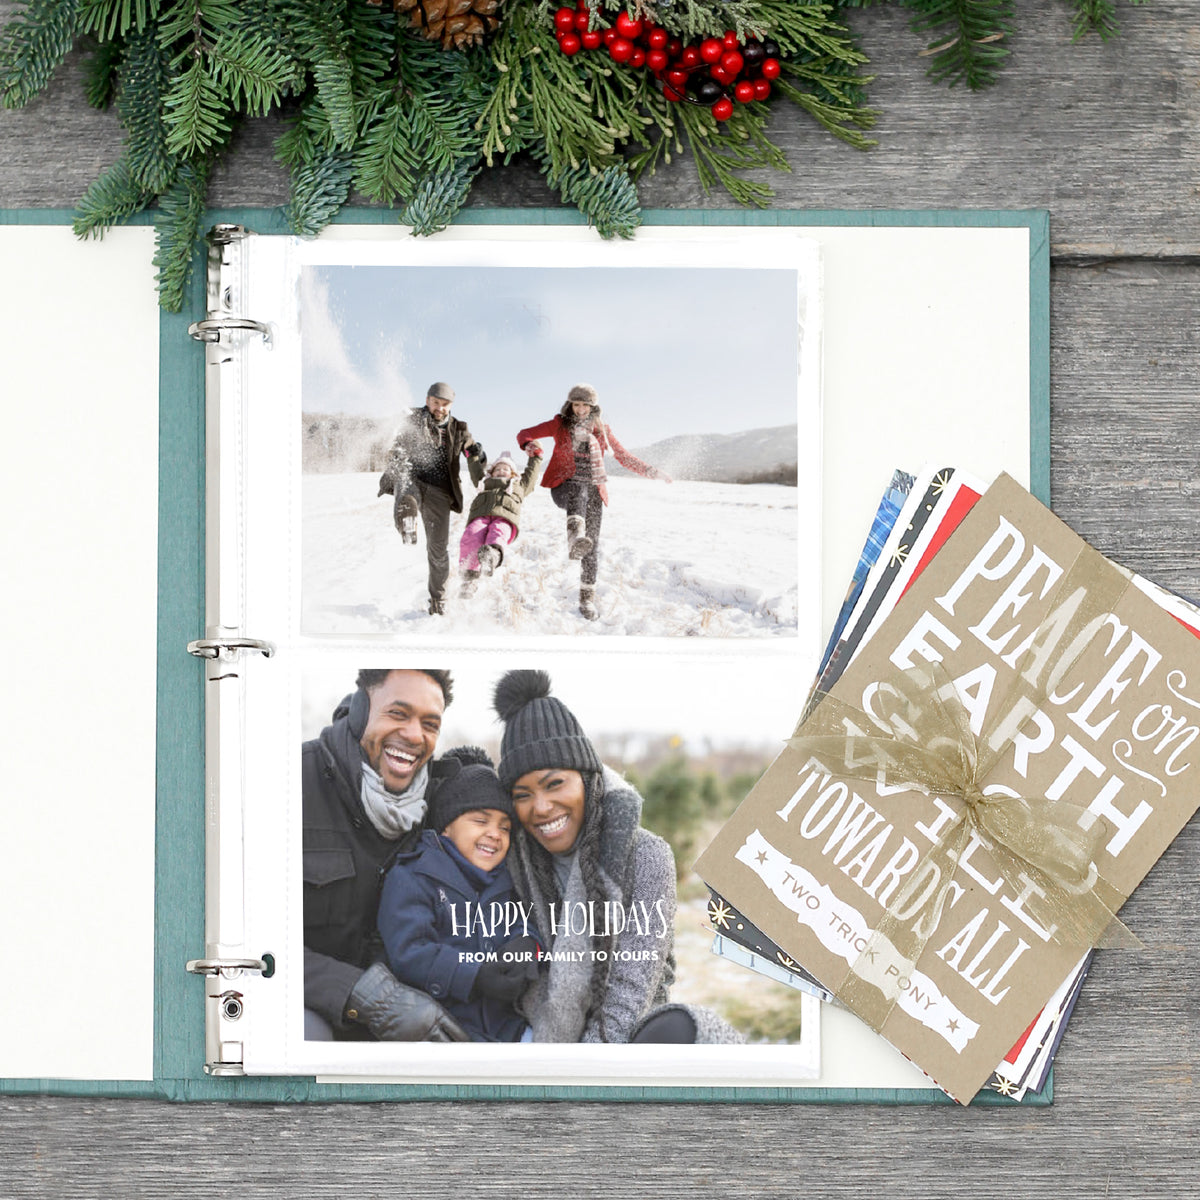 Holiday Card Album | Cover: Garnet Silk | Embossed with “Holiday Cards” | Available Personalized